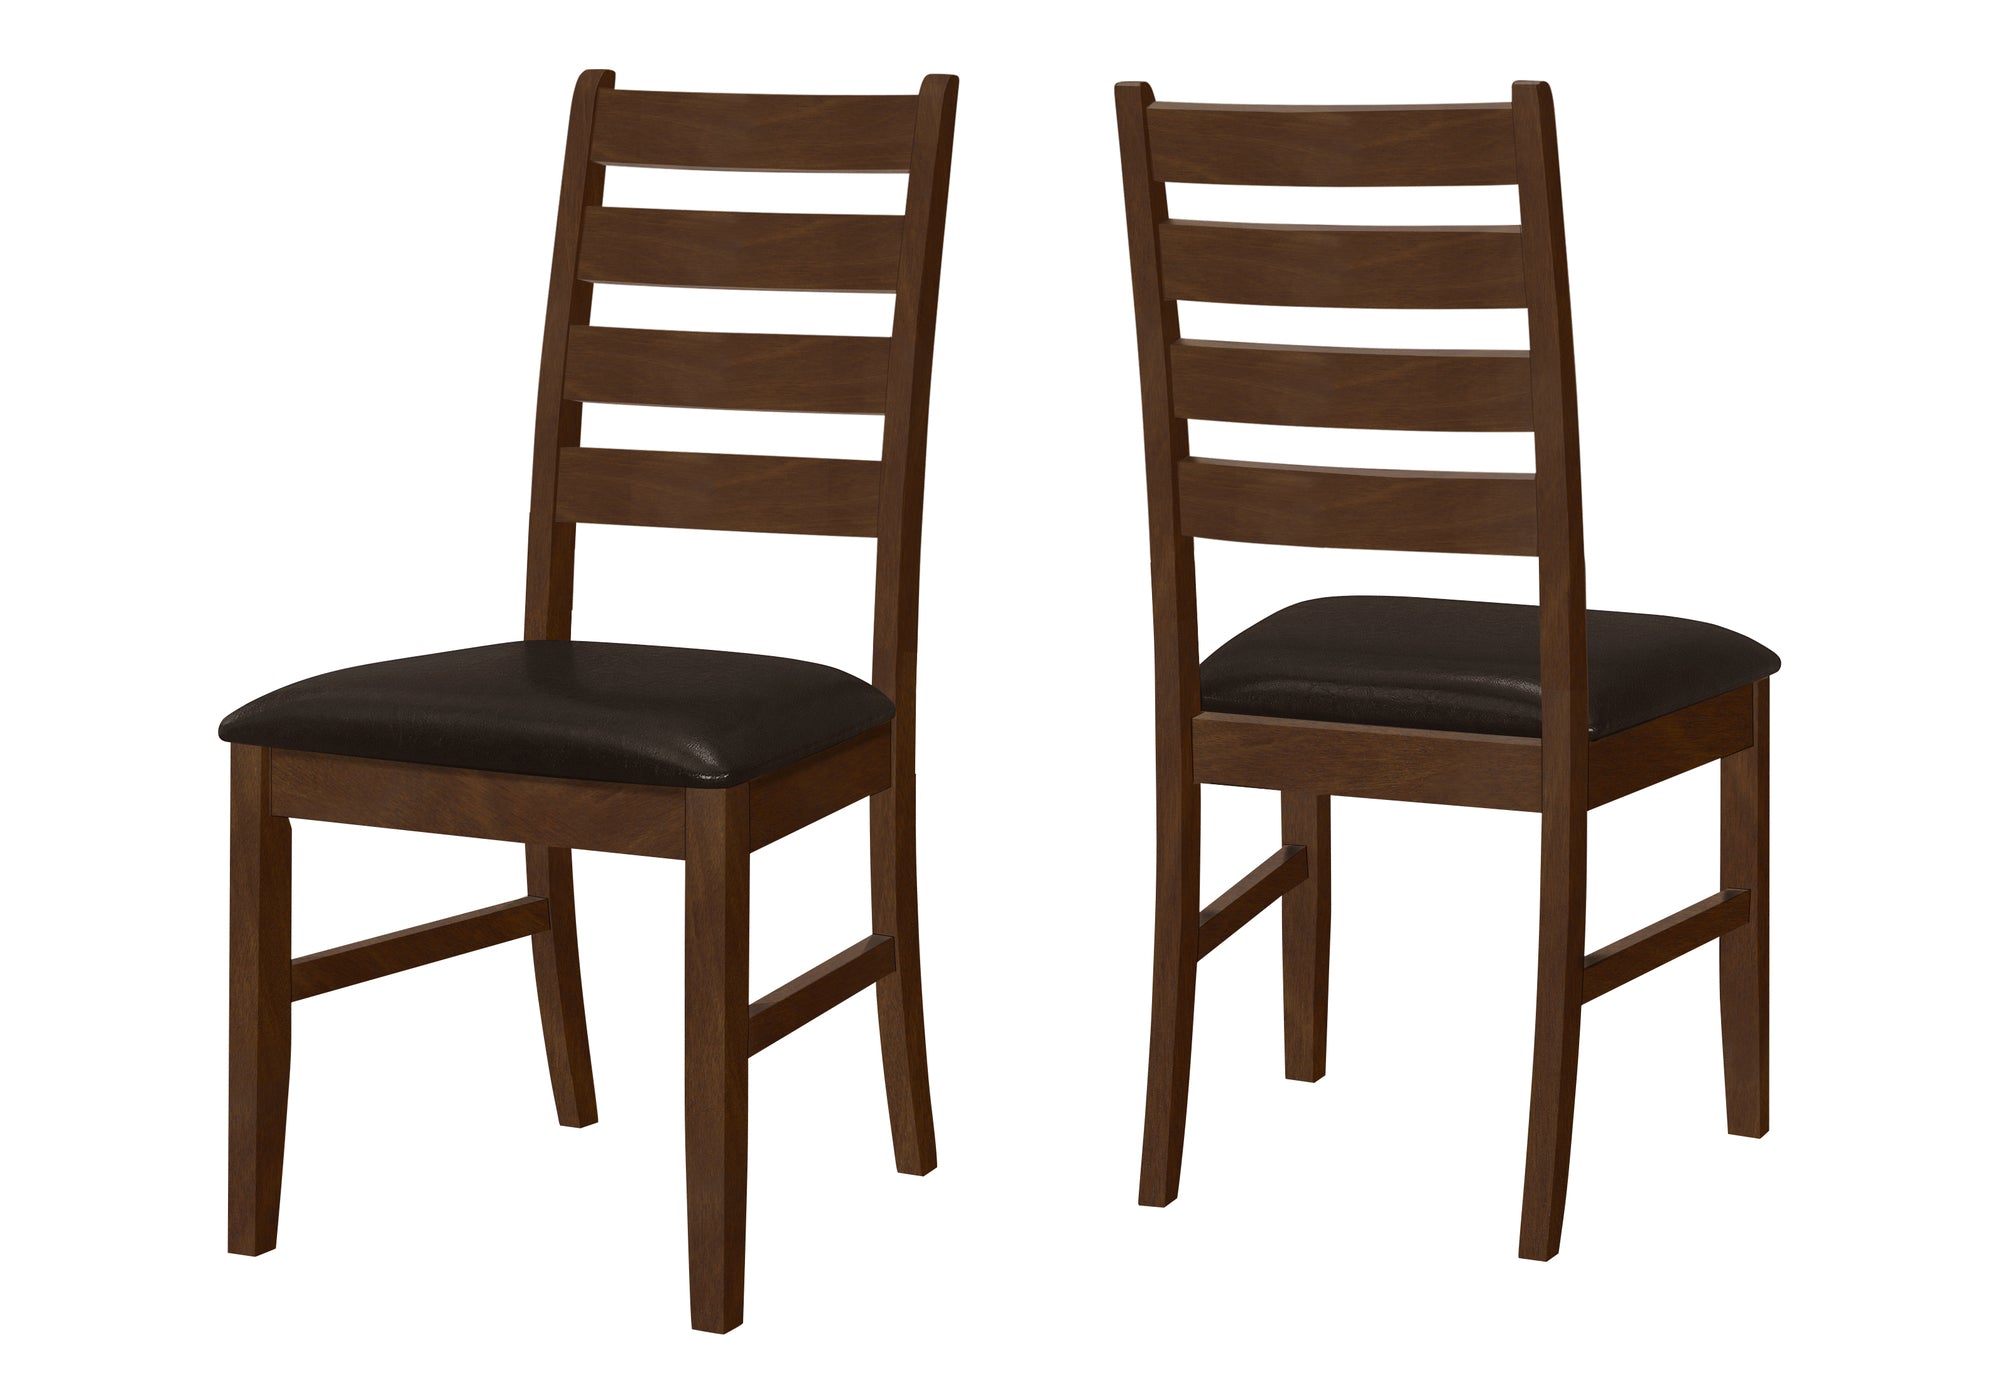 MN-341372    Dining Chair, 37" Height, Set Of 2, Dining Room, Kitchen, Side, Upholstered, Brown Solid Wood, Brown Leather Look, Transitional